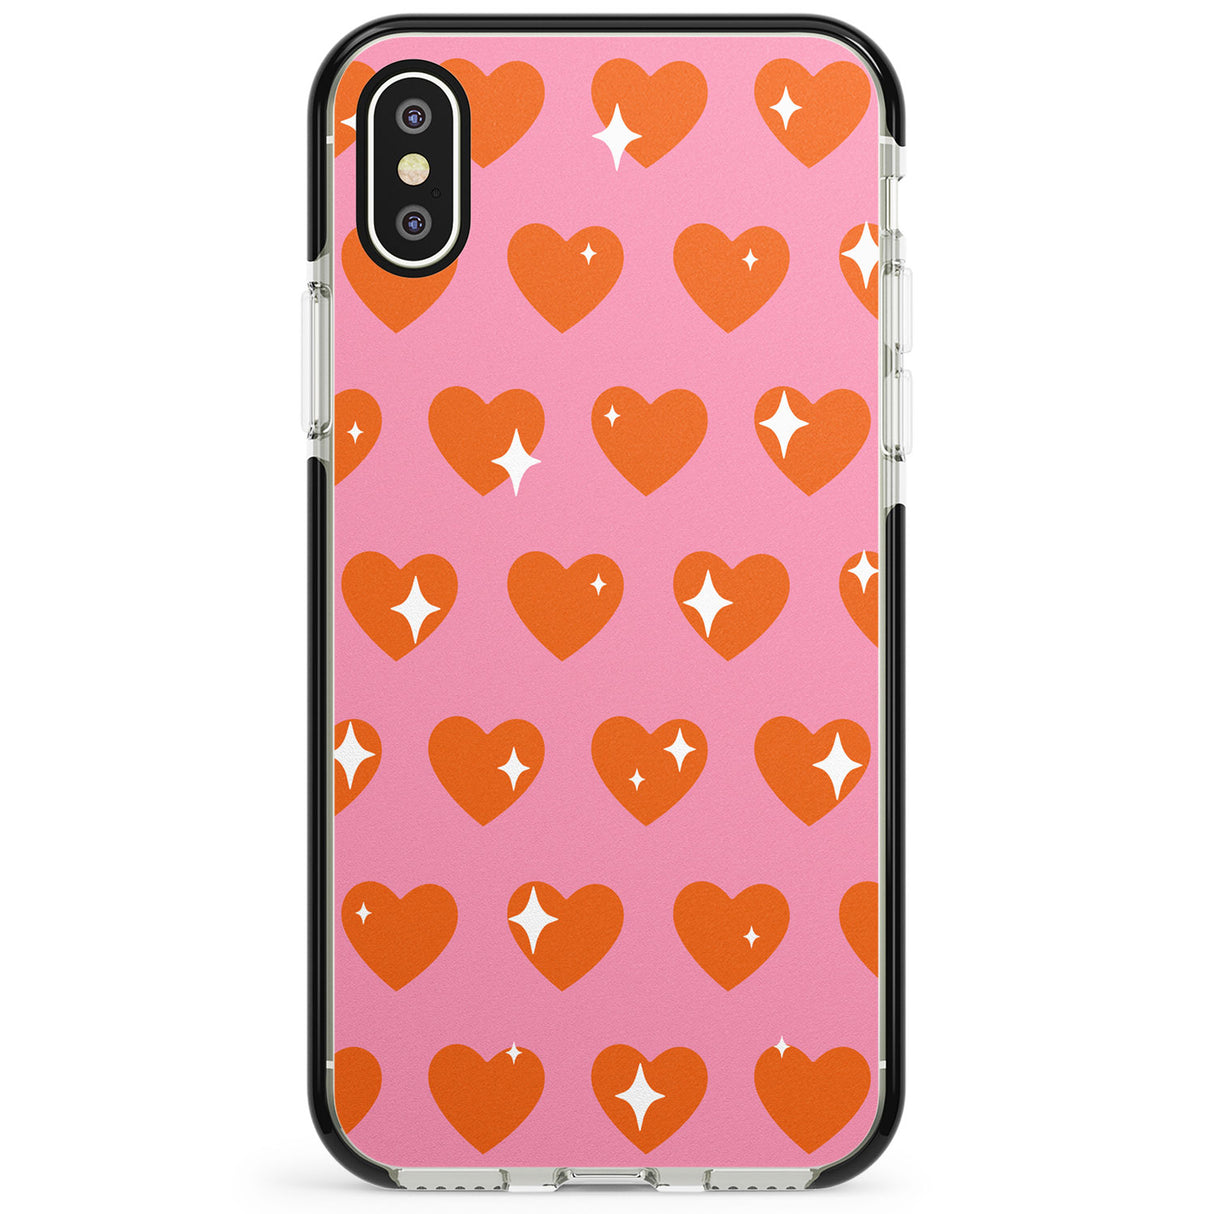 Sweet Hearts (Sunset) Phone Case for iPhone X XS Max XR